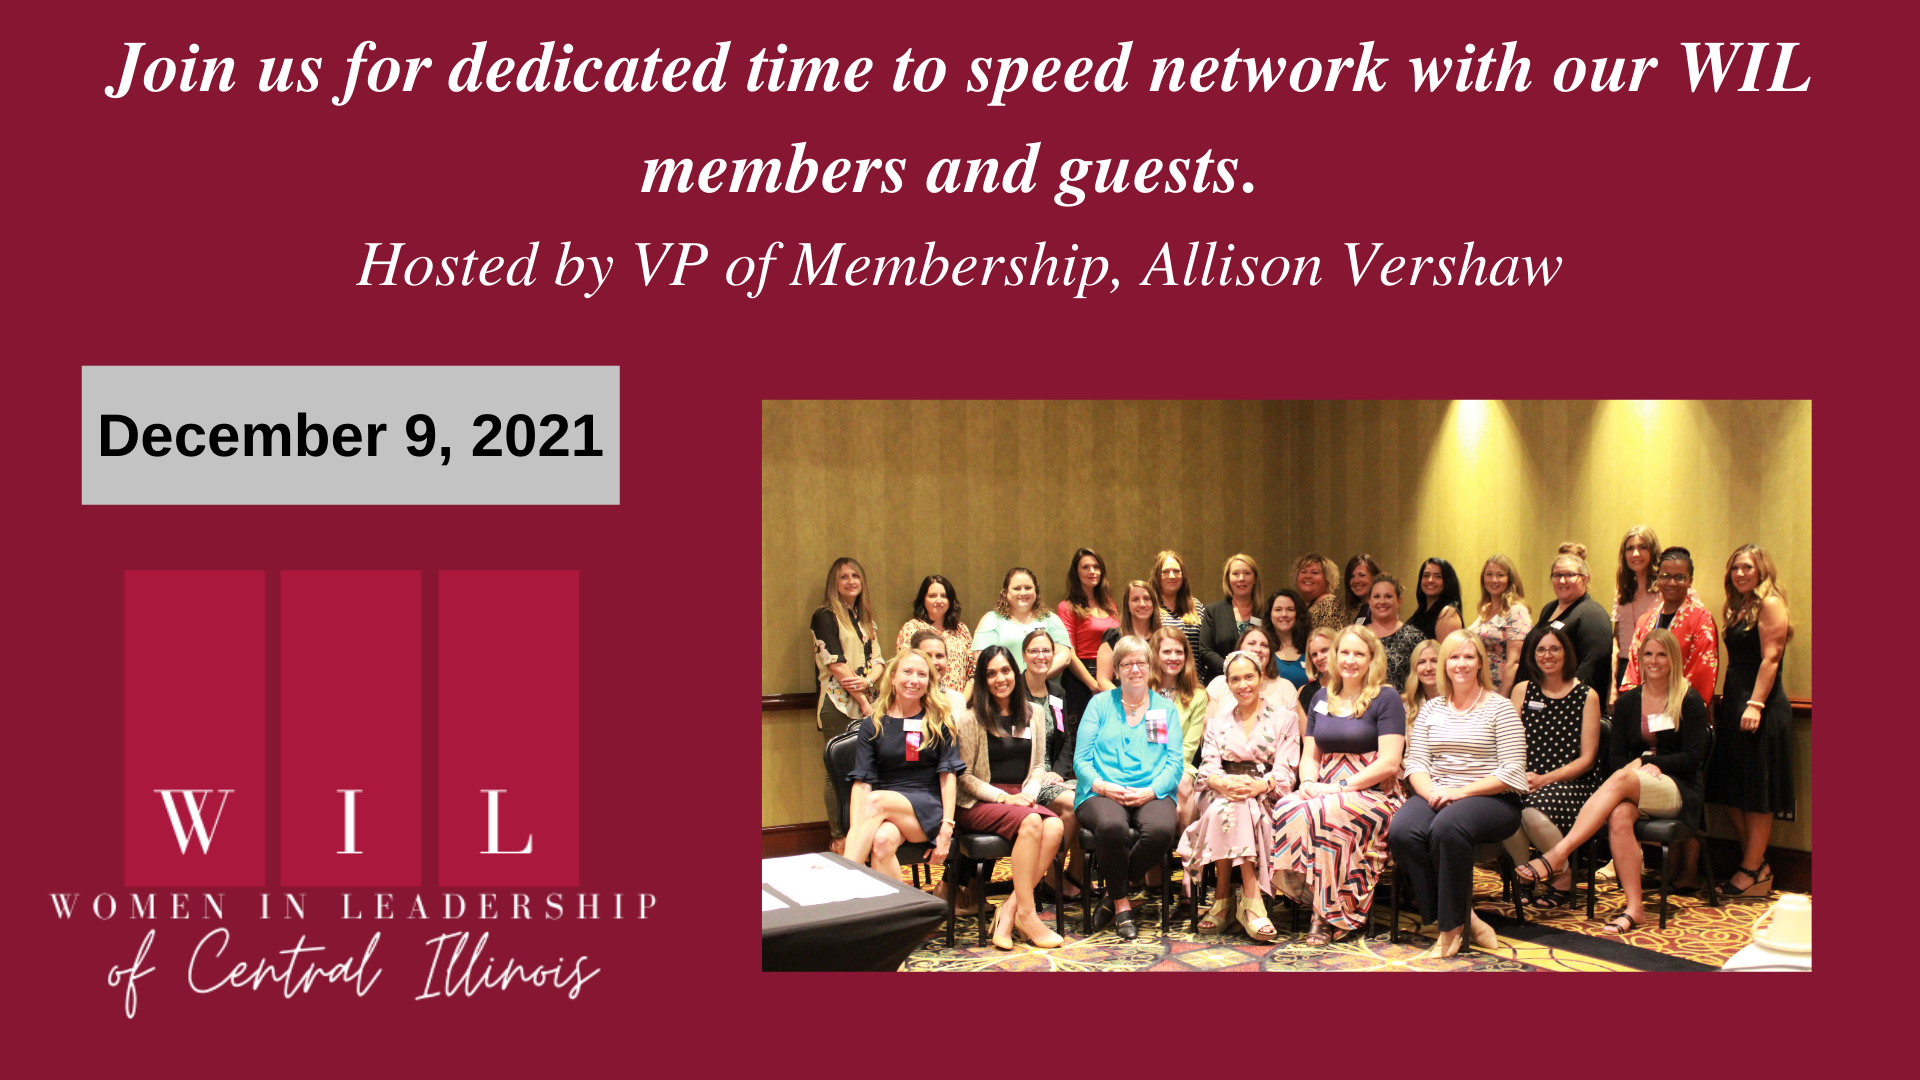 Join us for dedicated time to speed network with our WIL members and guests.